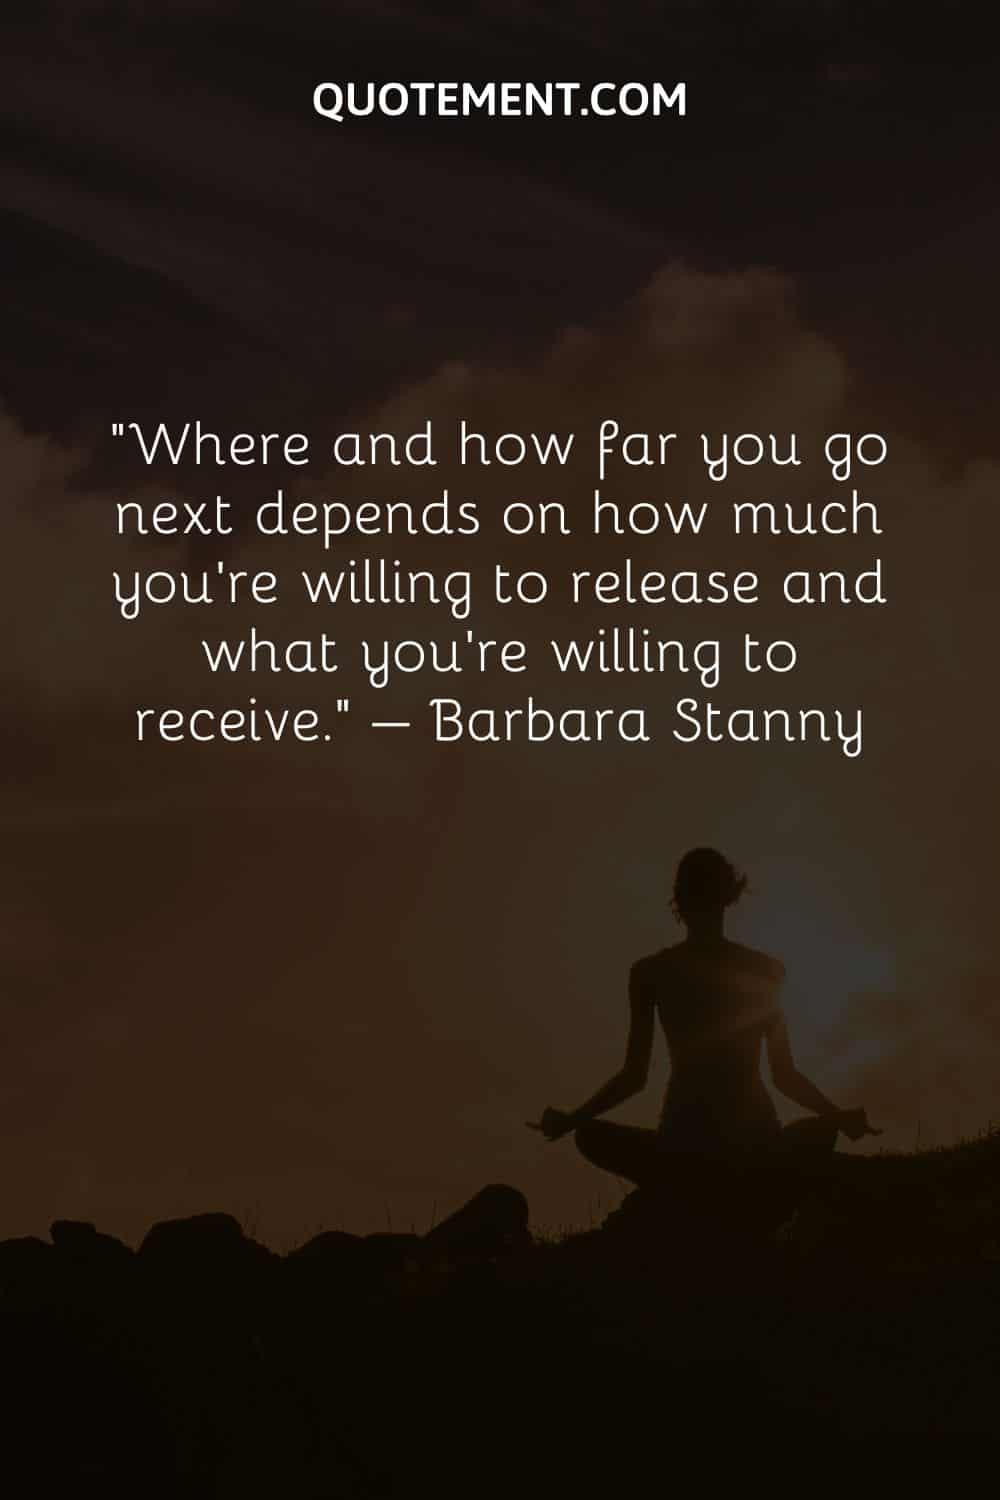 Where and how far you go next depends on how much you’re willing to release and what you’re willing to receive